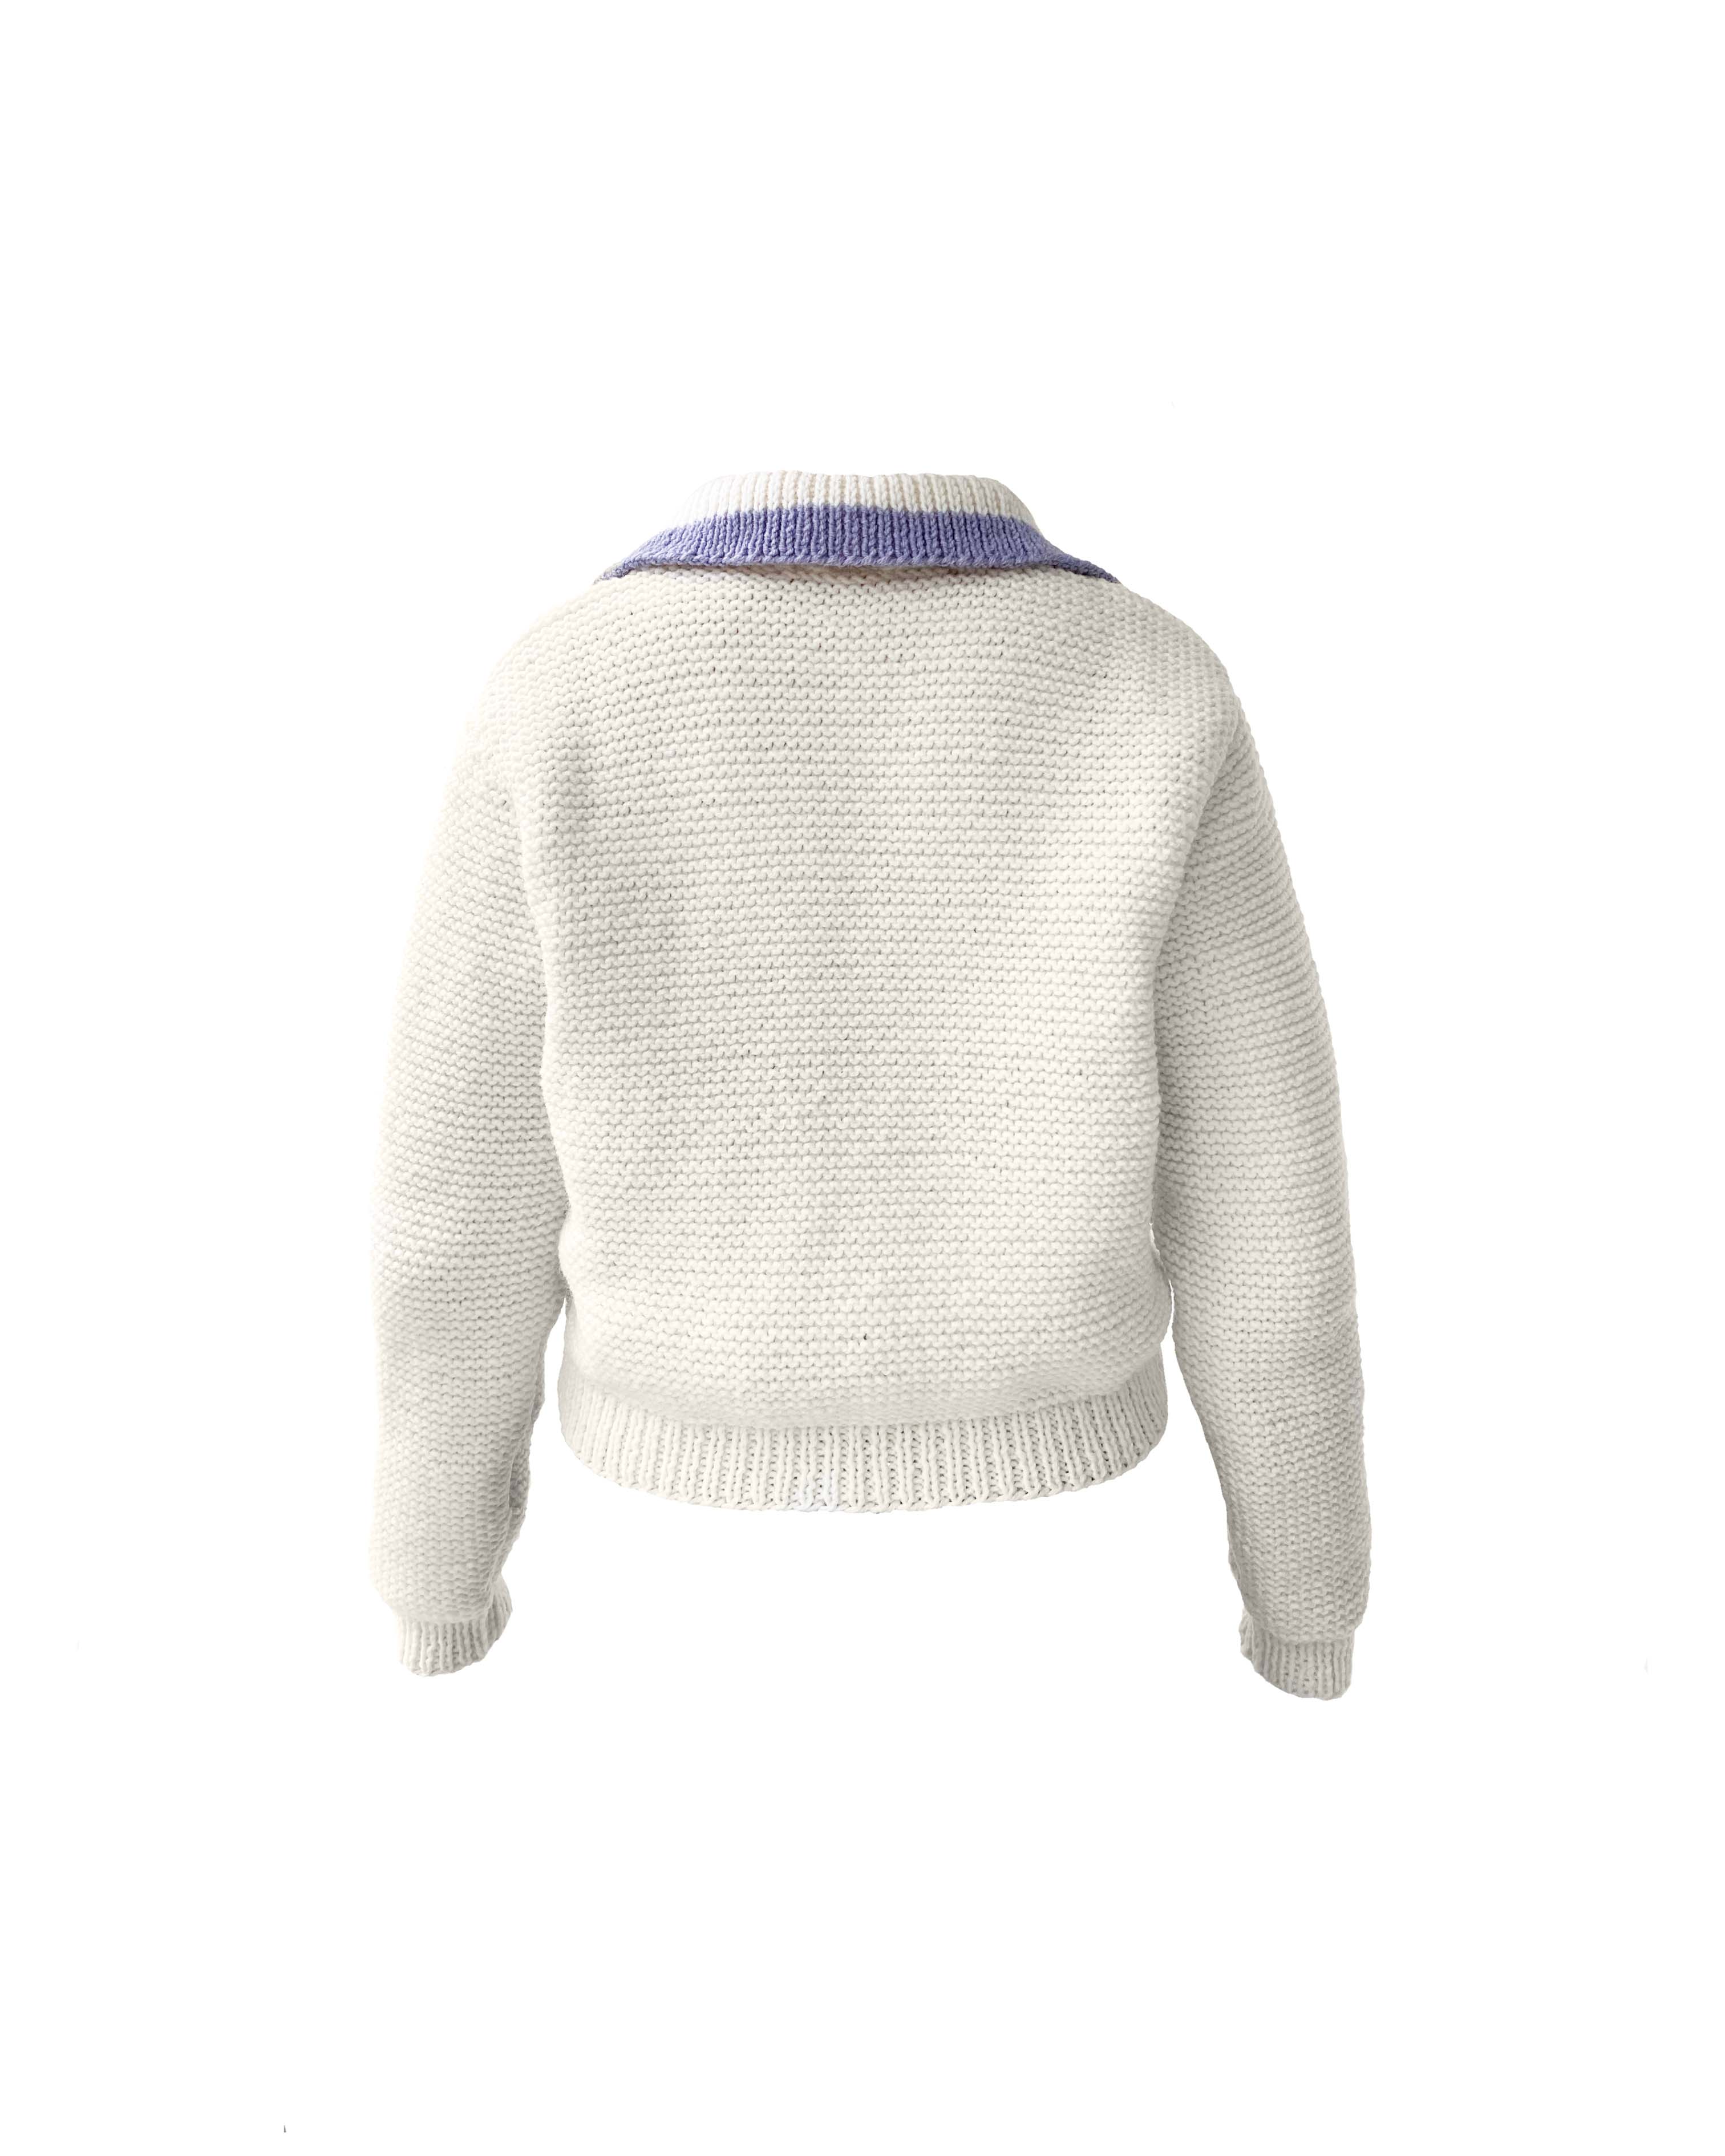 Collared Hand Knit Sweater